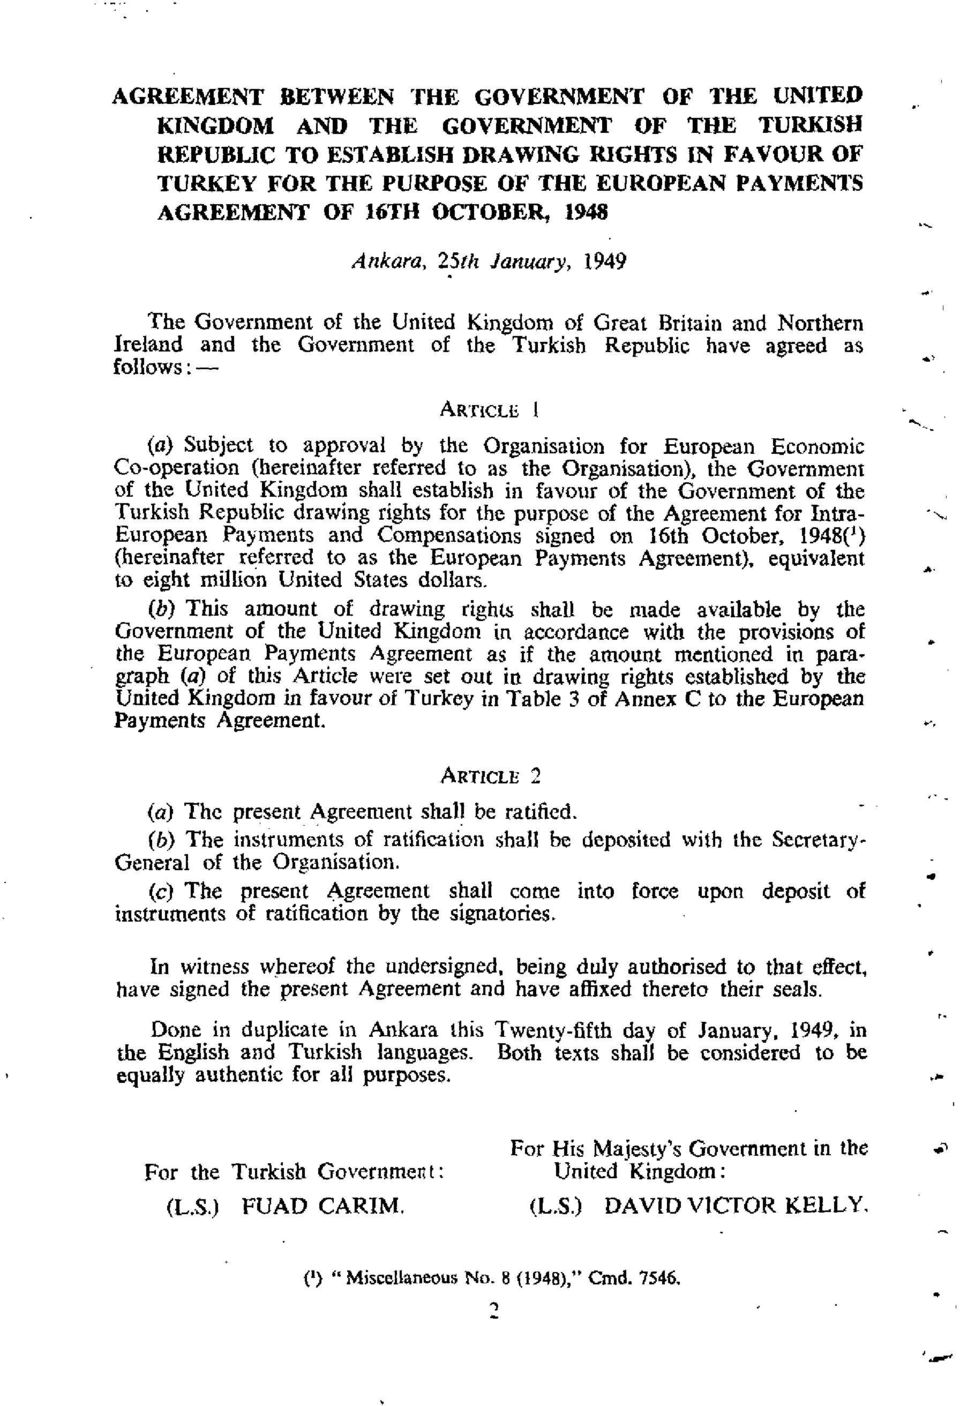 (a) Subject to approval by the Organisation for European Economic Co-operation (hereinafter referred to as the Organisation), the Government of the United Kingdom shall establish in favour of the